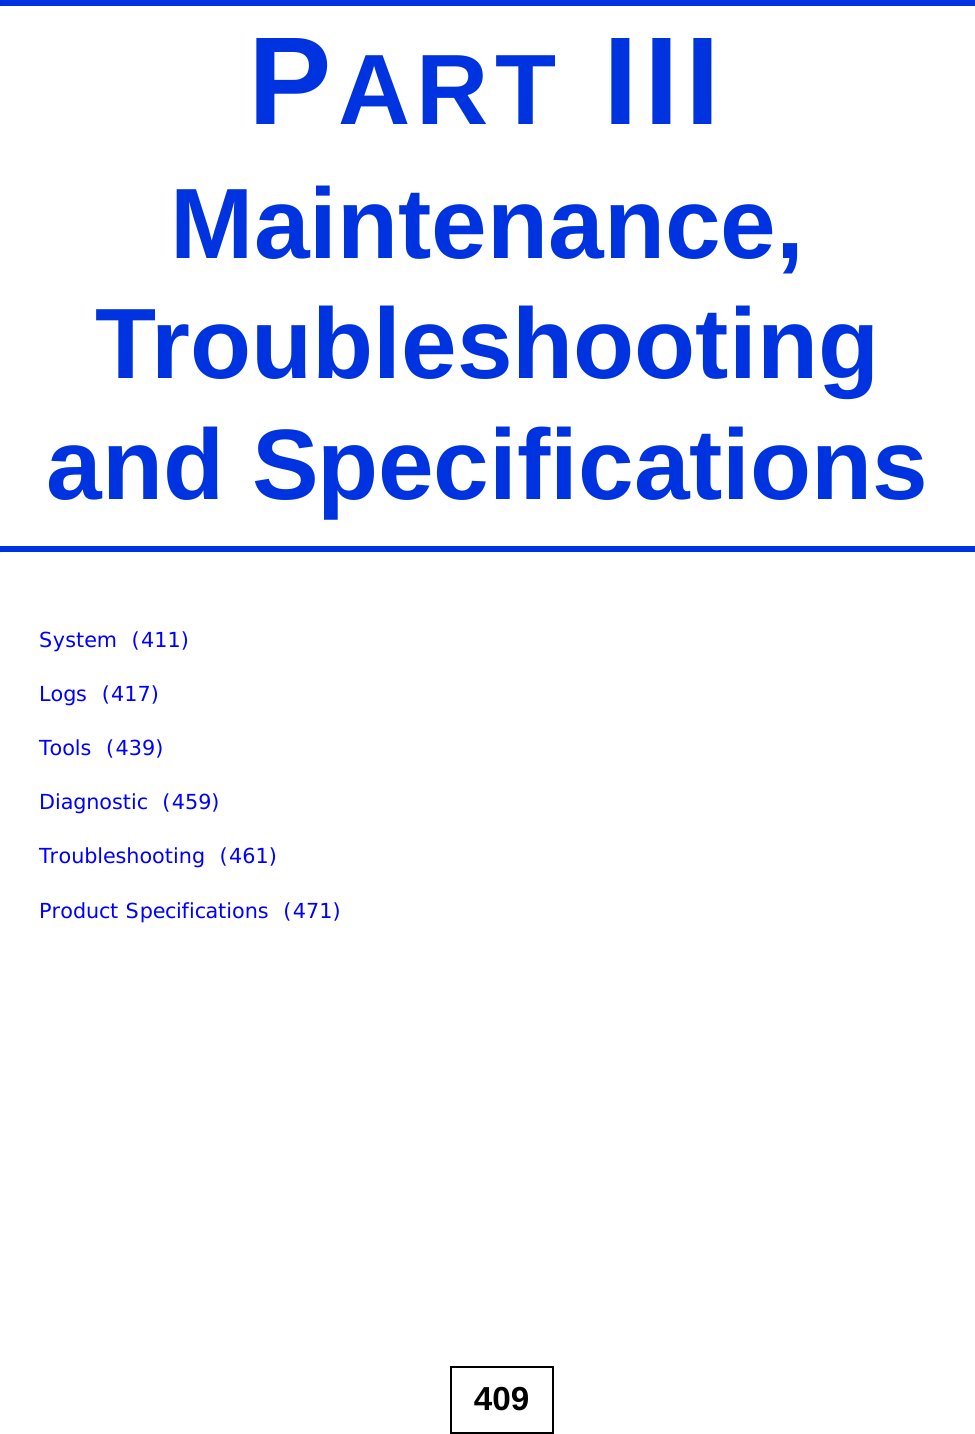 409PART IIIMaintenance, Troubleshooting and SpecificationsSystem  (411)Logs  (417)Tools  (439)Diagnostic  (459)Troubleshooting  (461)Product Specifications  (471)